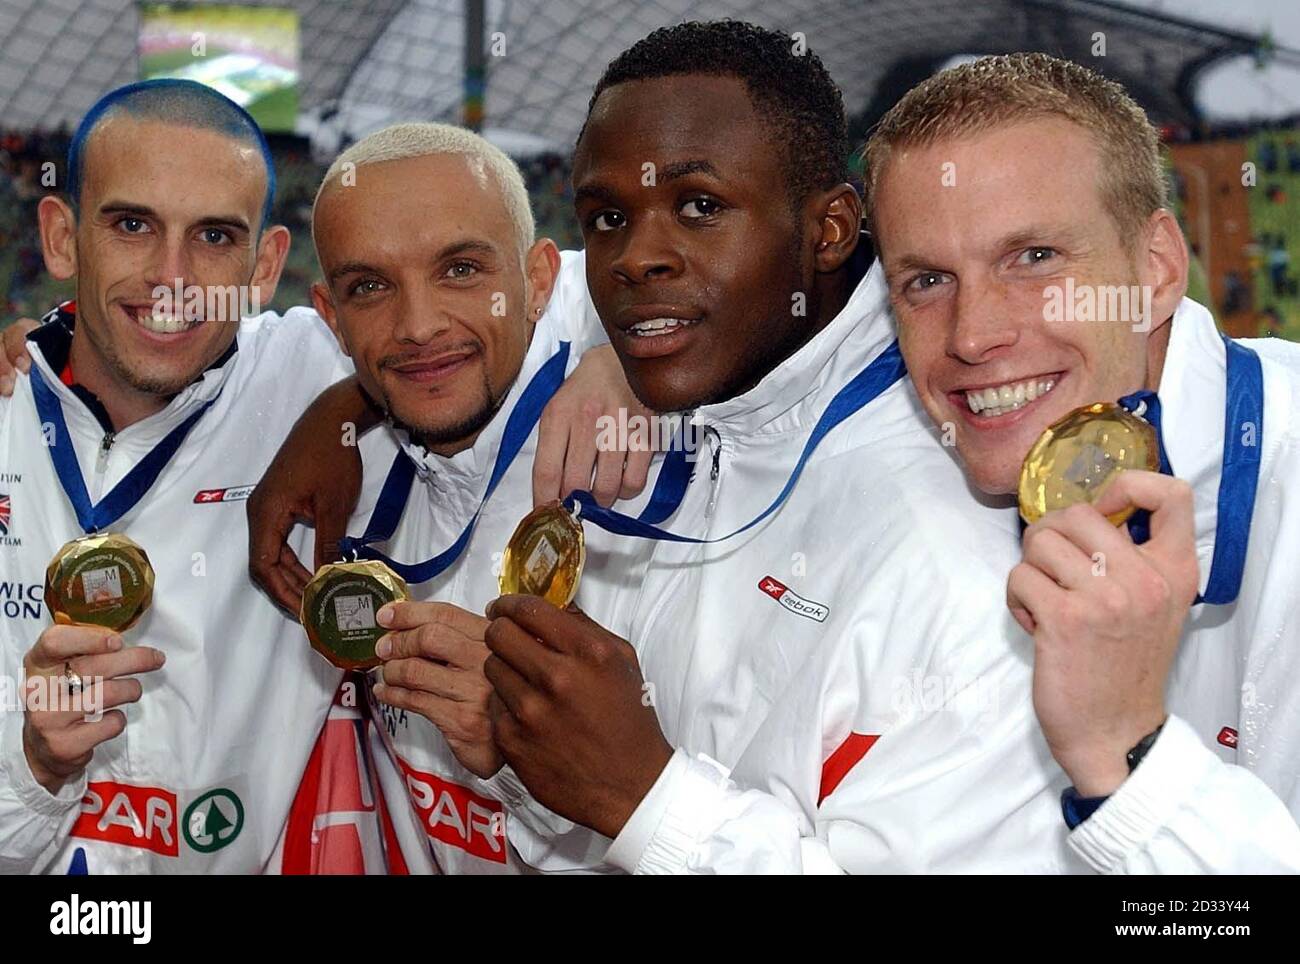 Great Britain's (from L-R) Matt Elias, Jamie Baulch, Daniel Caines and Jared Deacon celebrate with their gold medals after winning the men's 4x400 relay during the European Athletics Championships in Munich, Germany. Stock Photo